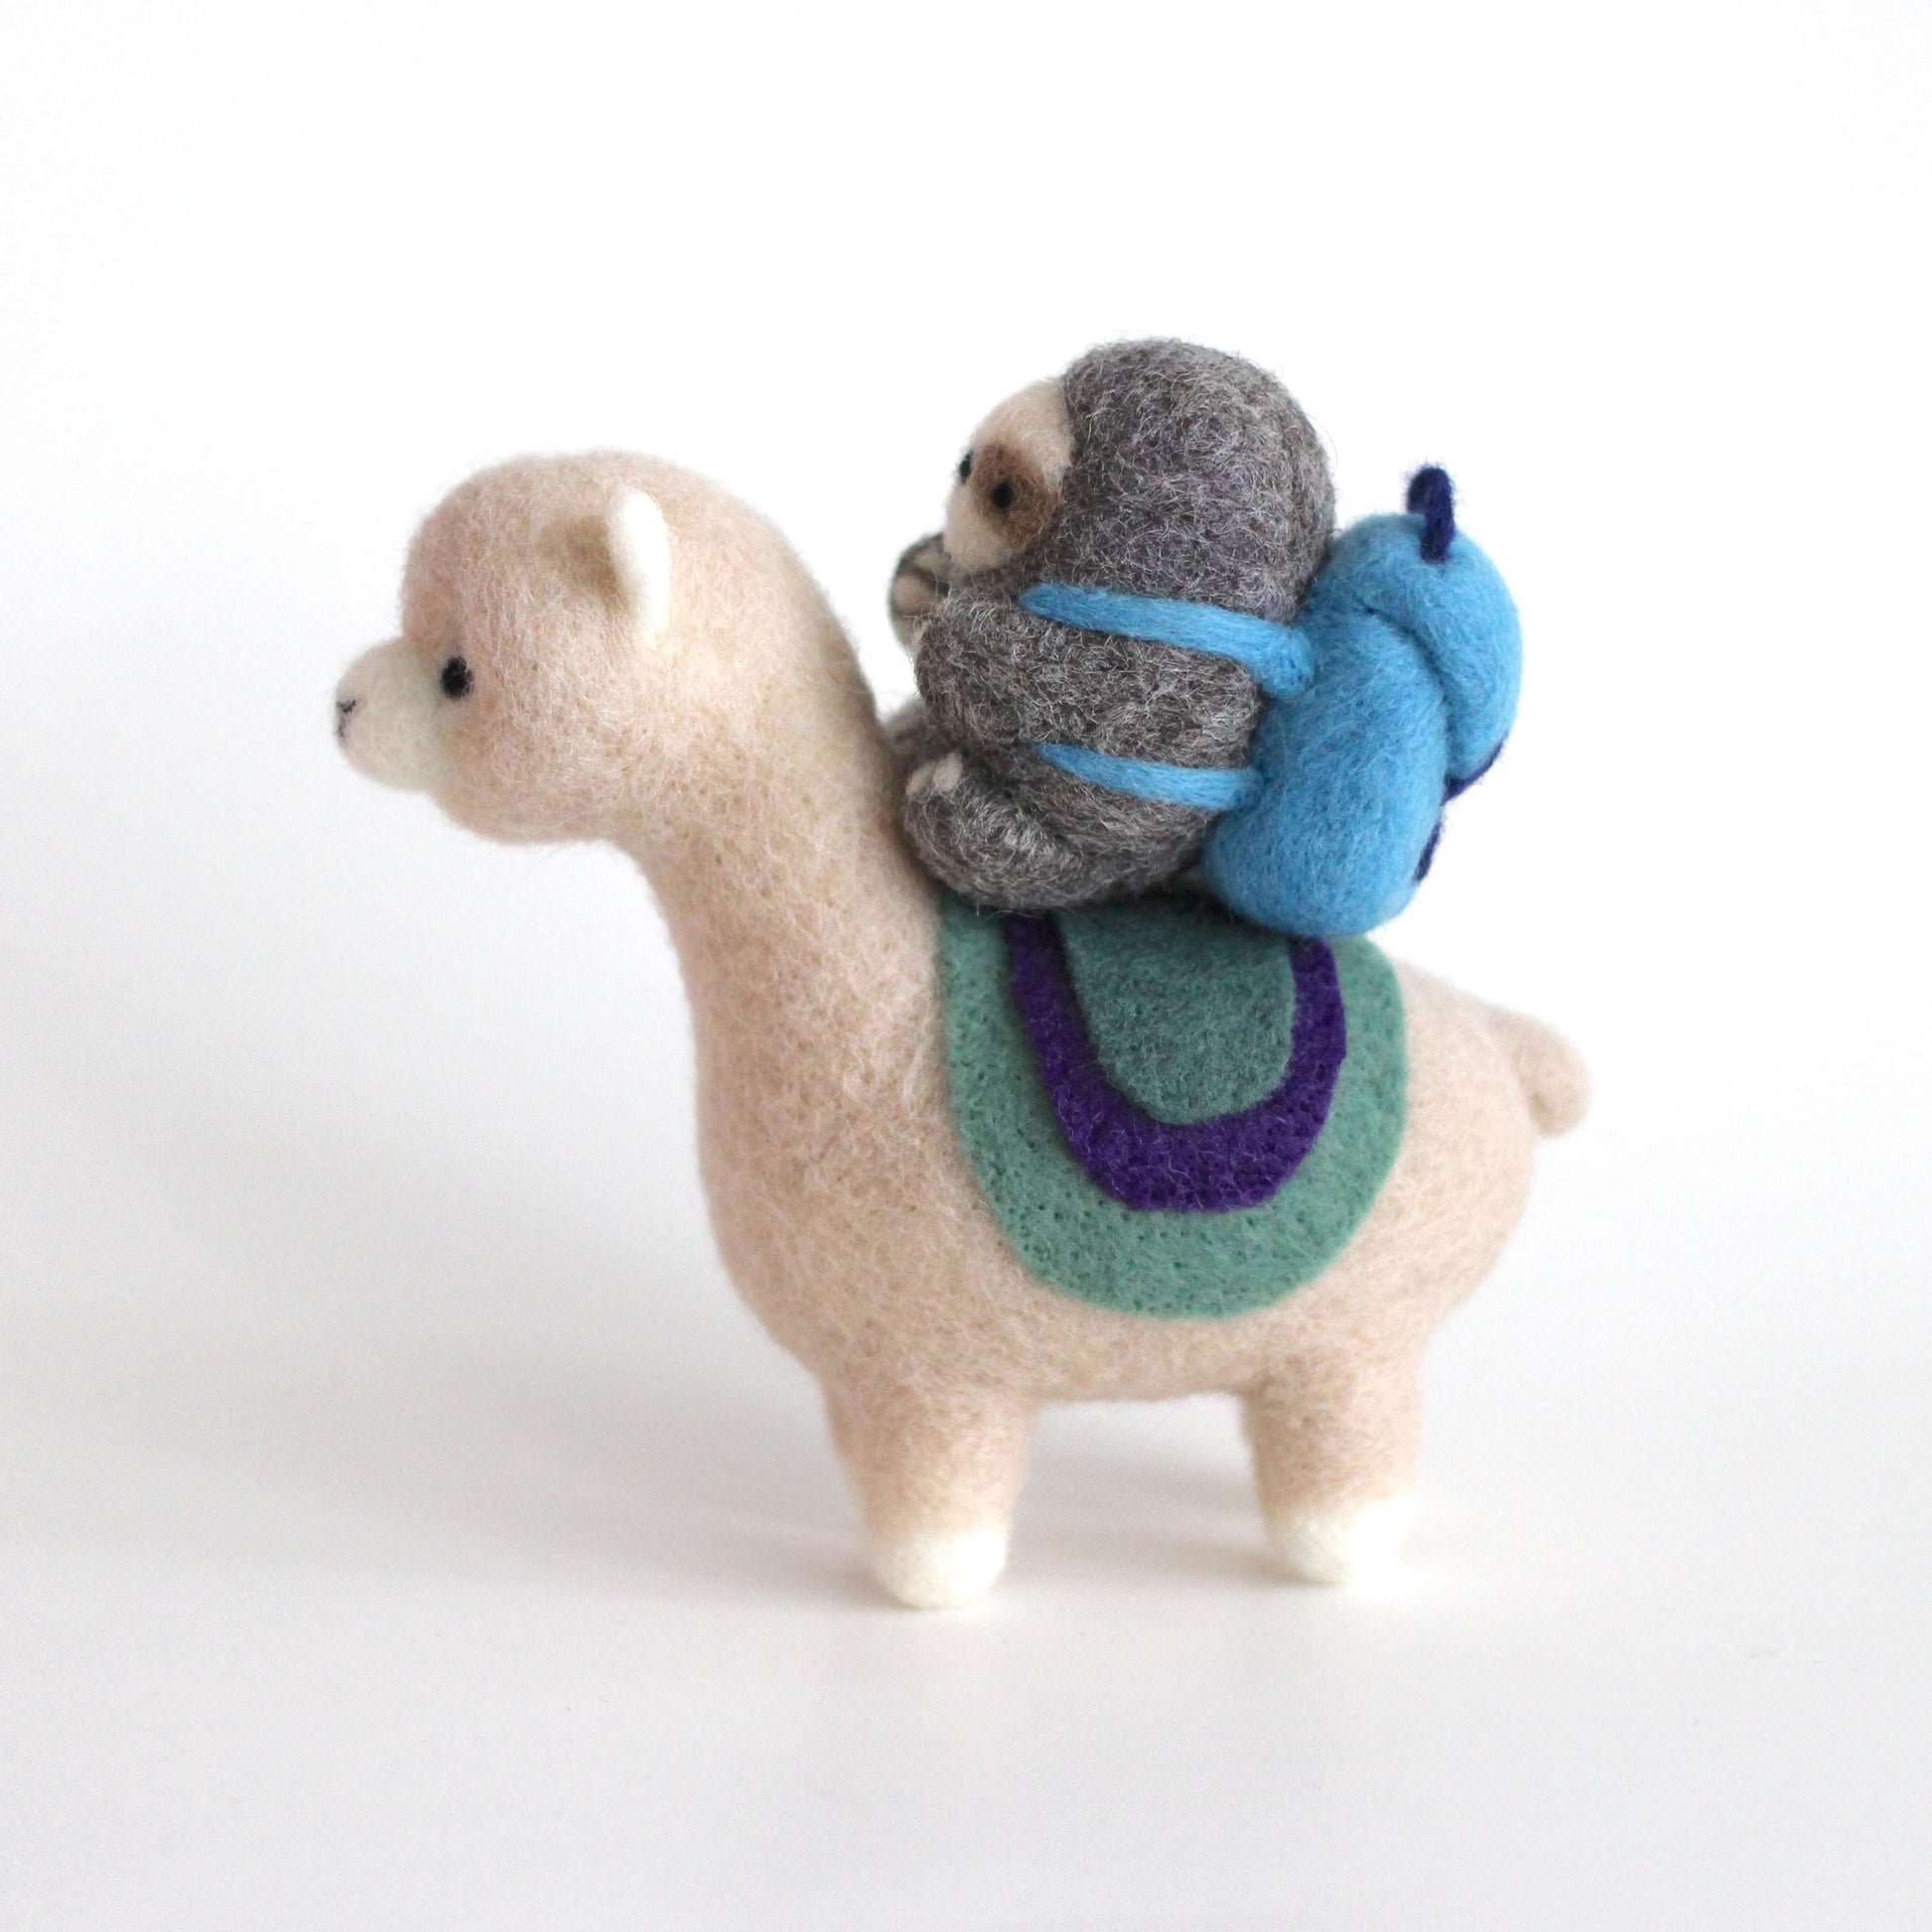 Needle Felted Alpaca and Backpacking Sloth Adventurers by Wild Whimsy Woolies